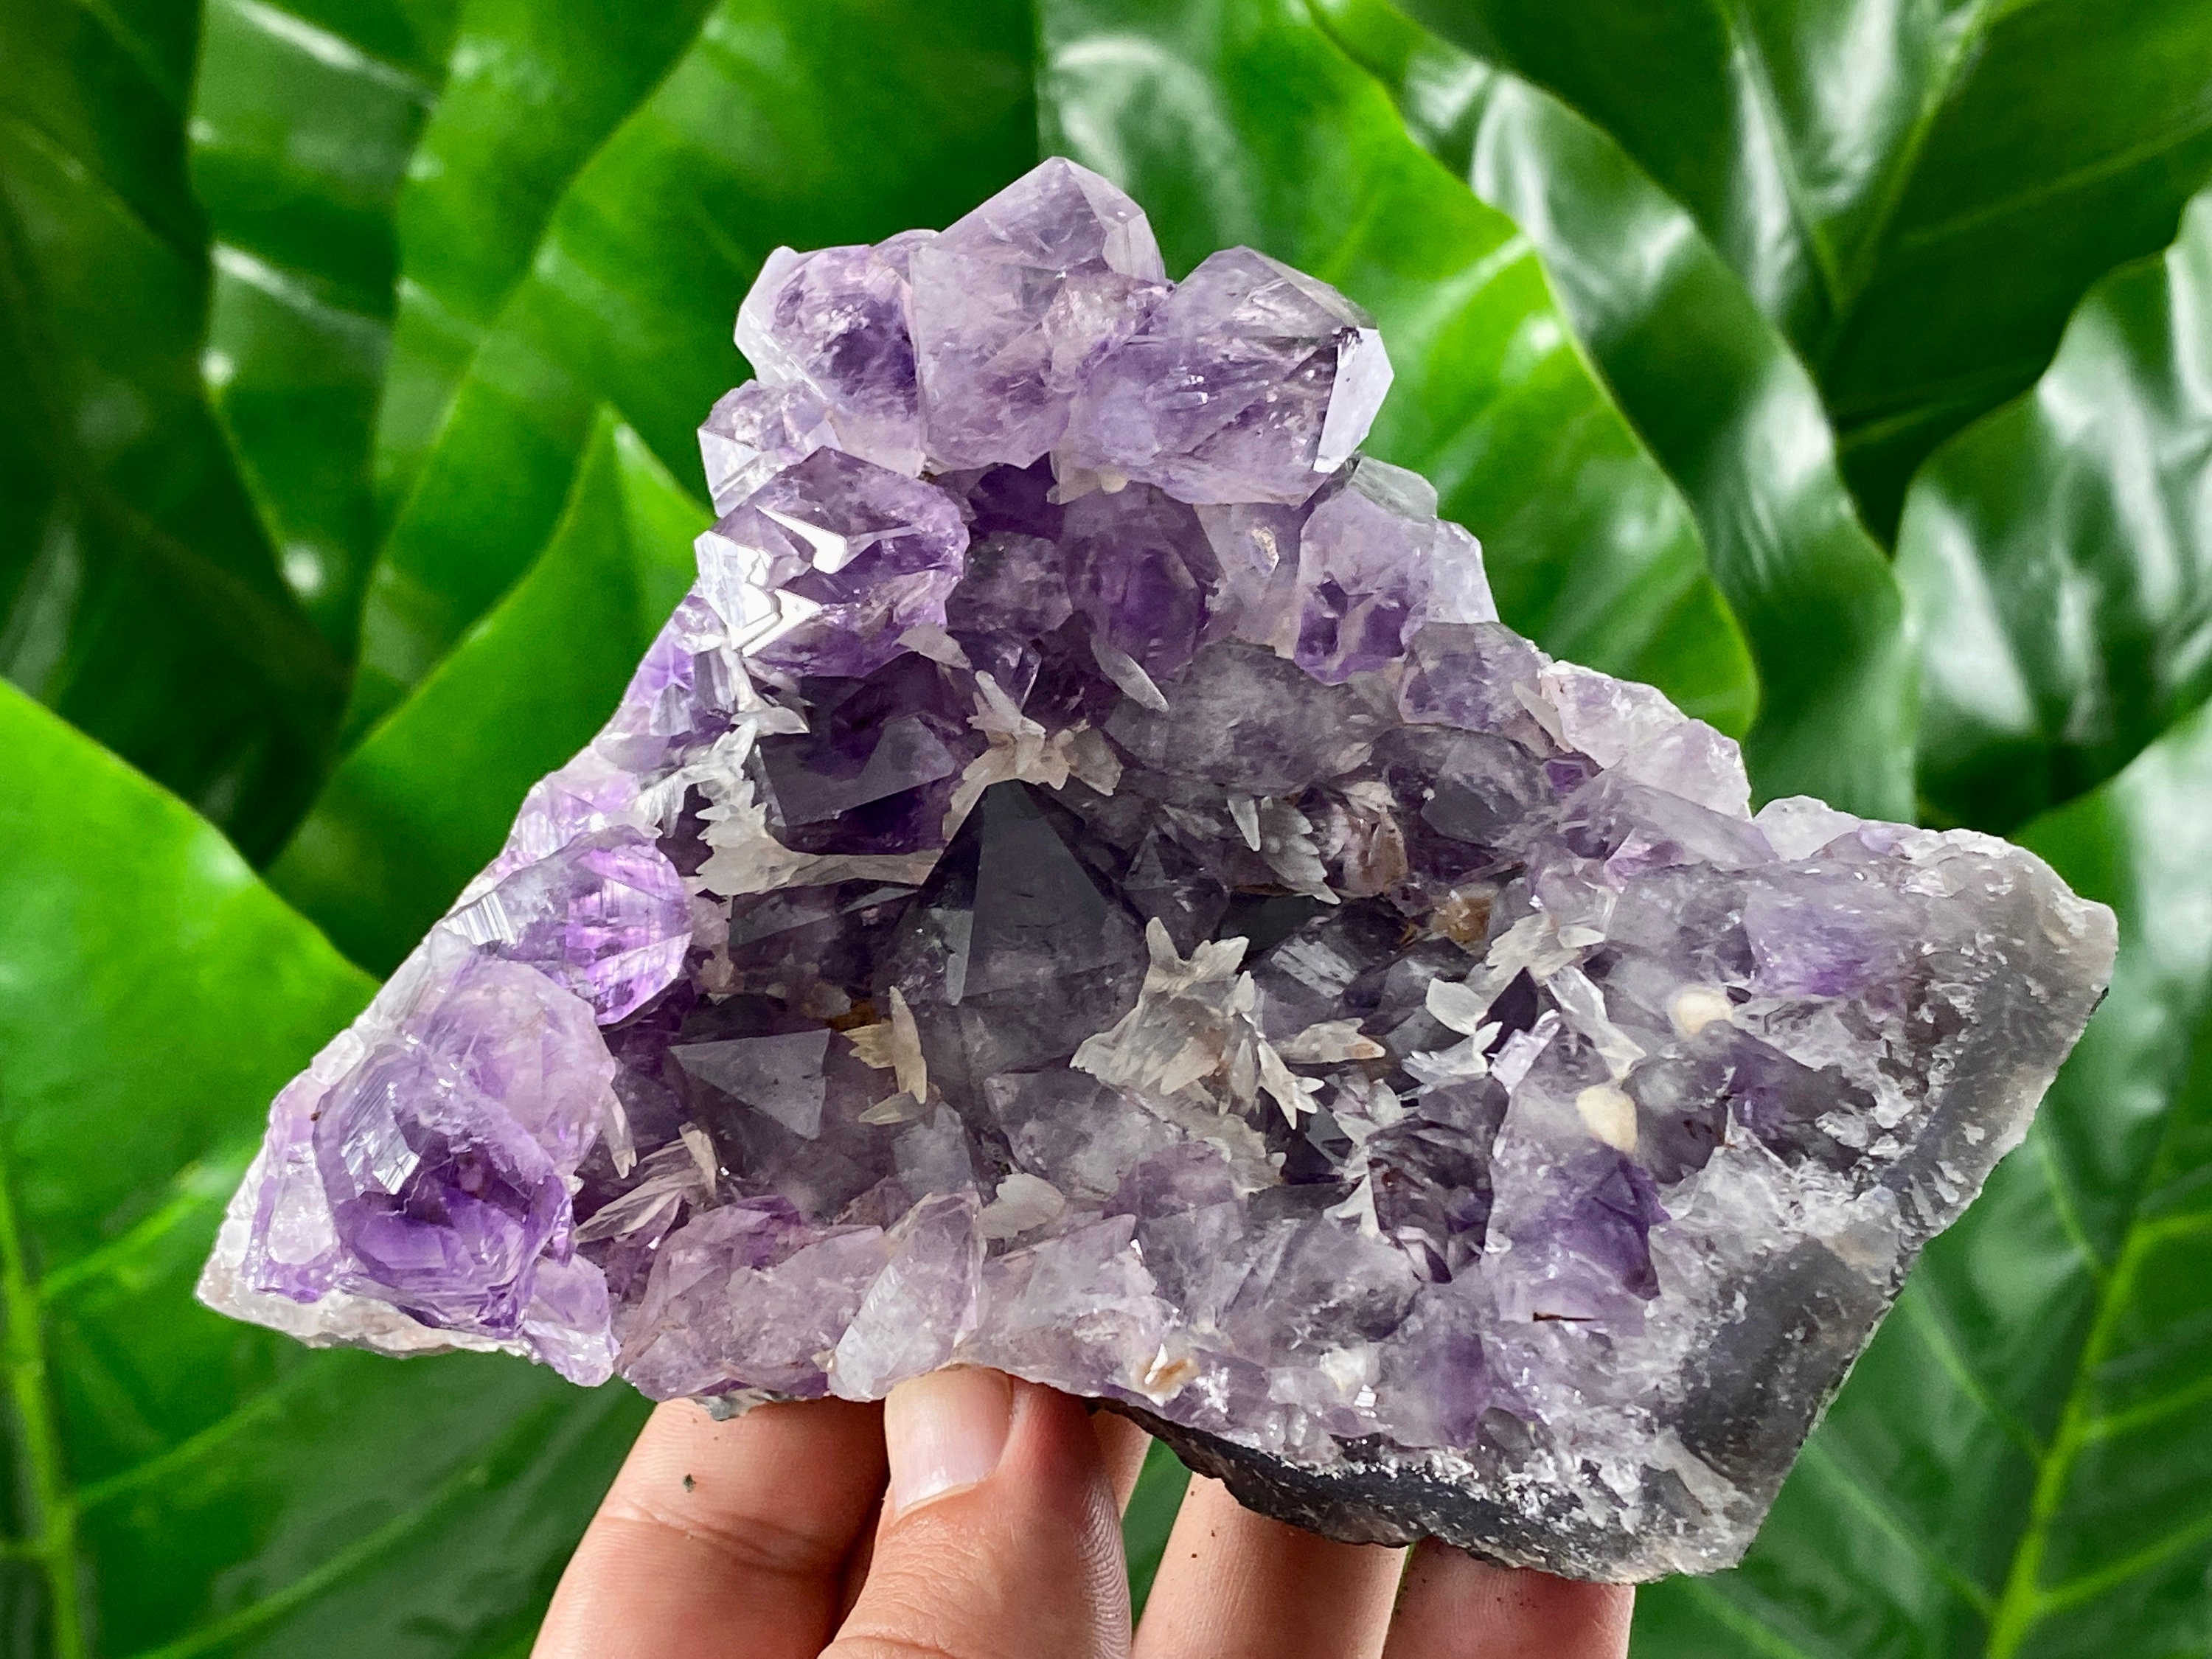 EMPORION Large Natural Amethyst (8 lb to 10 lb) Crystal Clusters Stone from Uruguay Raw Geode Quartz - Deep Purple Color